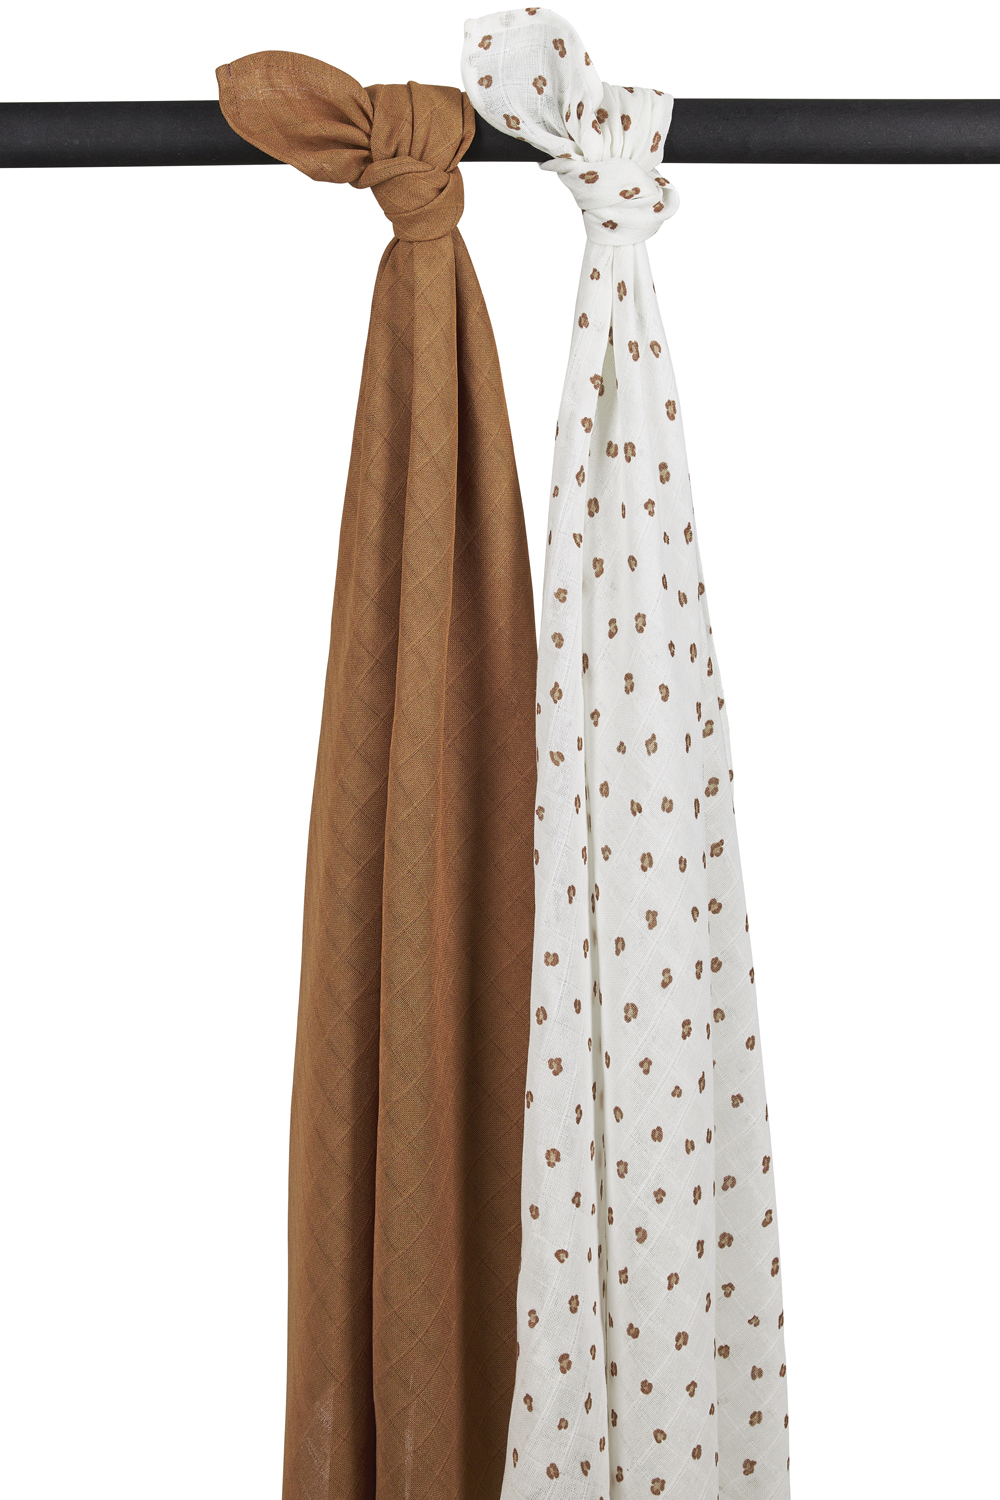 Swaddle 2-pack hydrofiel Mini Panther - toffee - 120x120cm